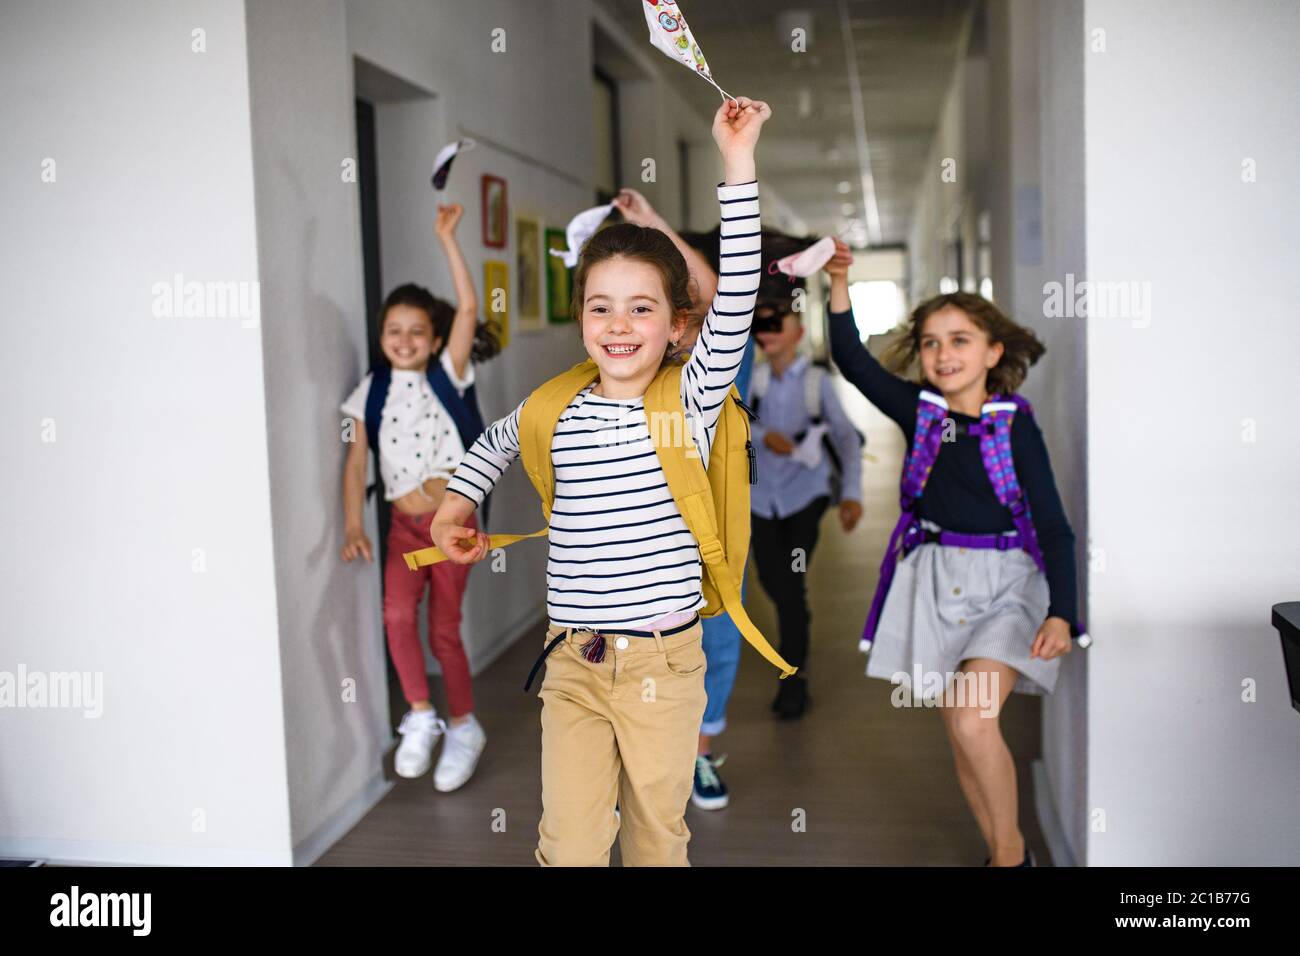 Group of cheerful children going home from school after covid-19 quarantine and lockdown. Stock Photo